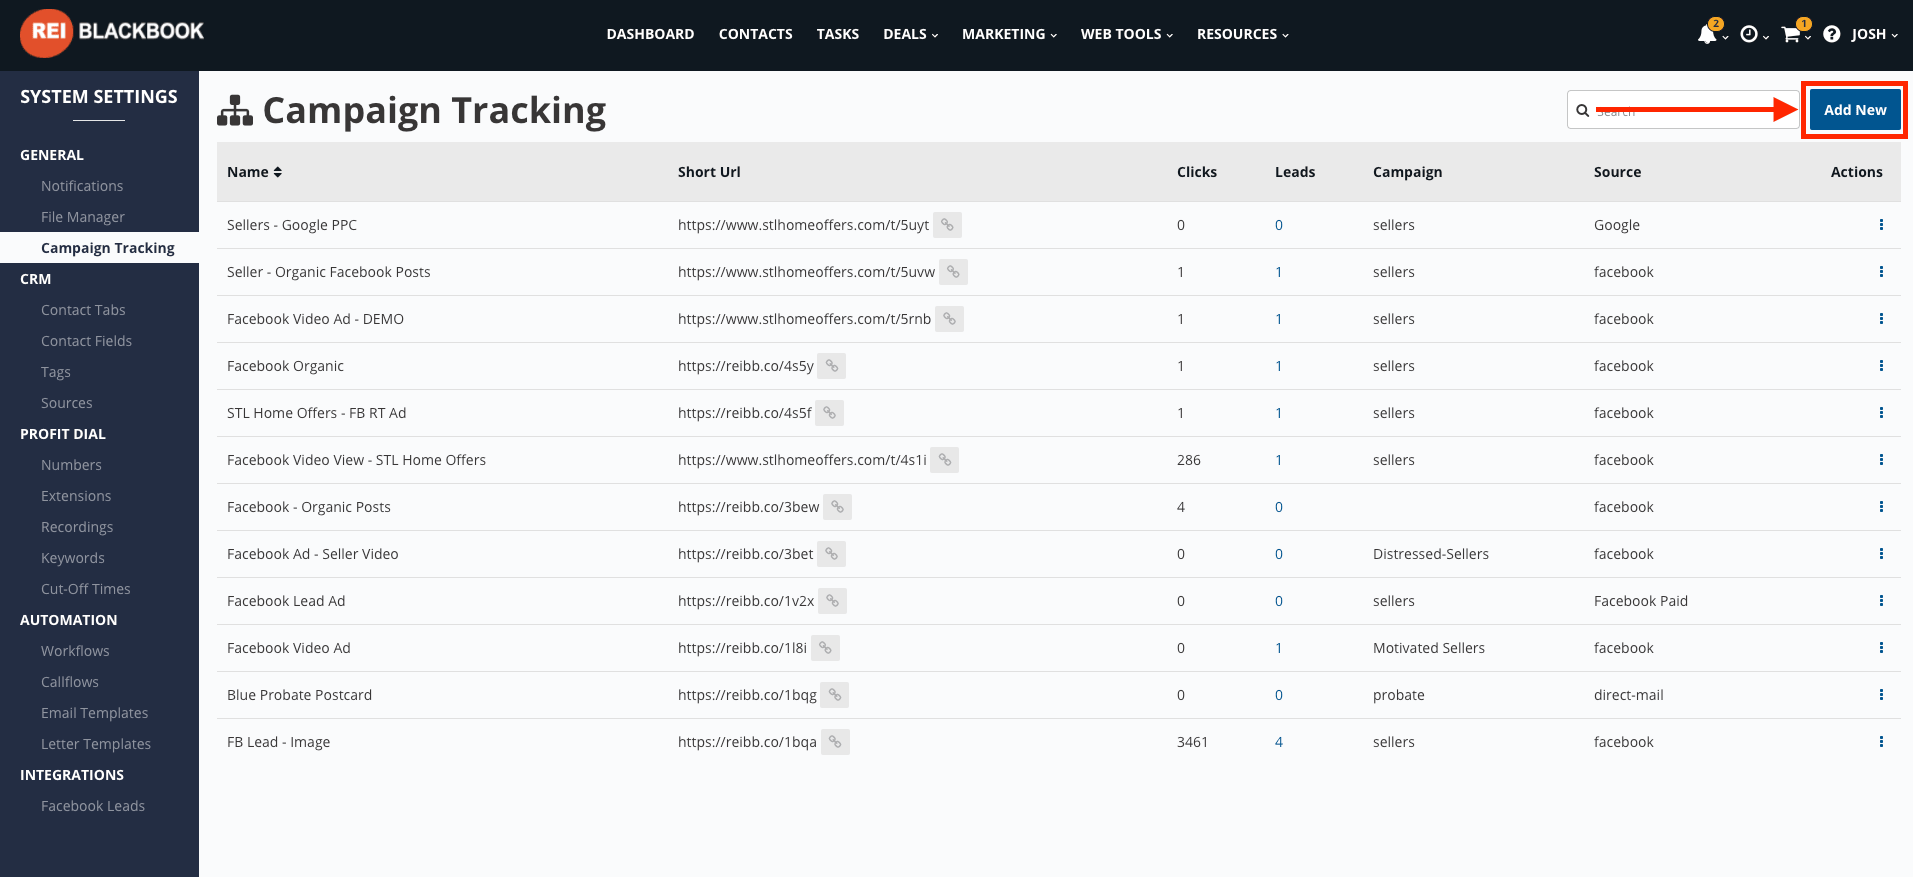 Select "Add New" to set up new marketing campaign tracking link